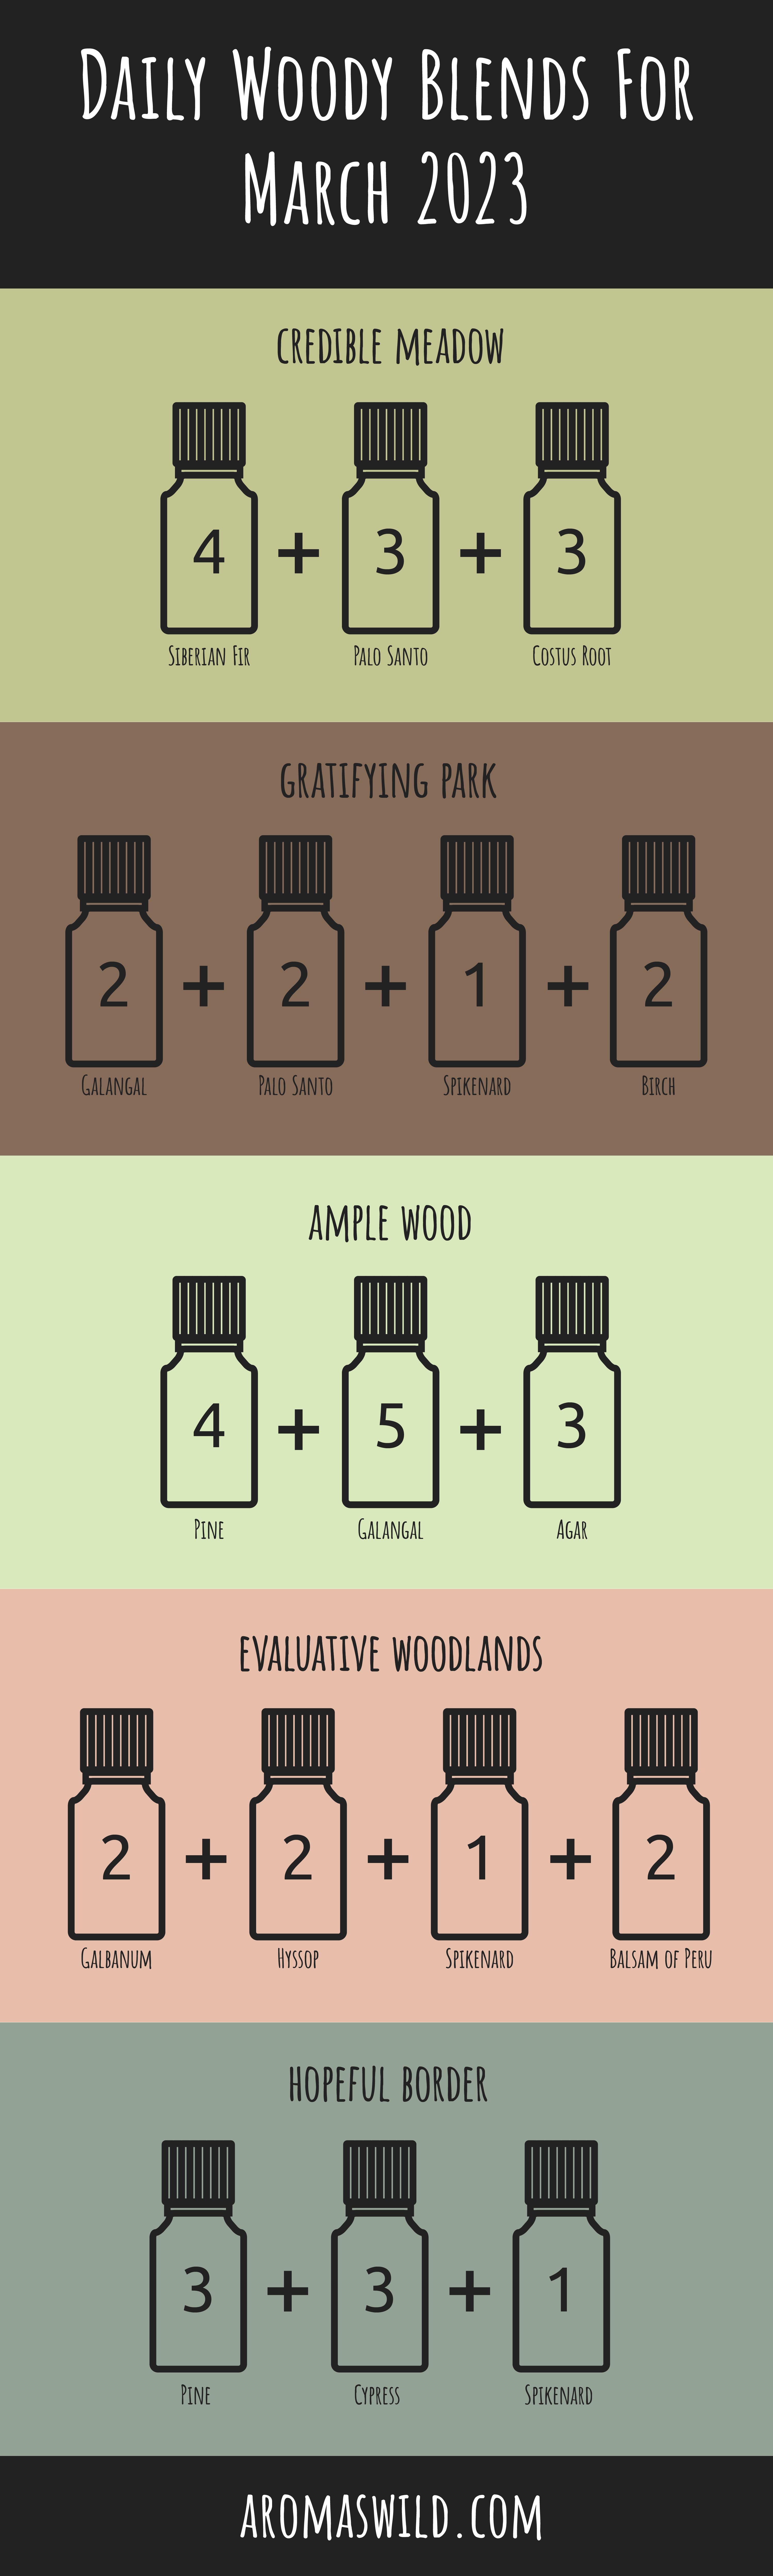 DIY Essential Oils Diffuser – Daily Woody Blends For 9 March 2023